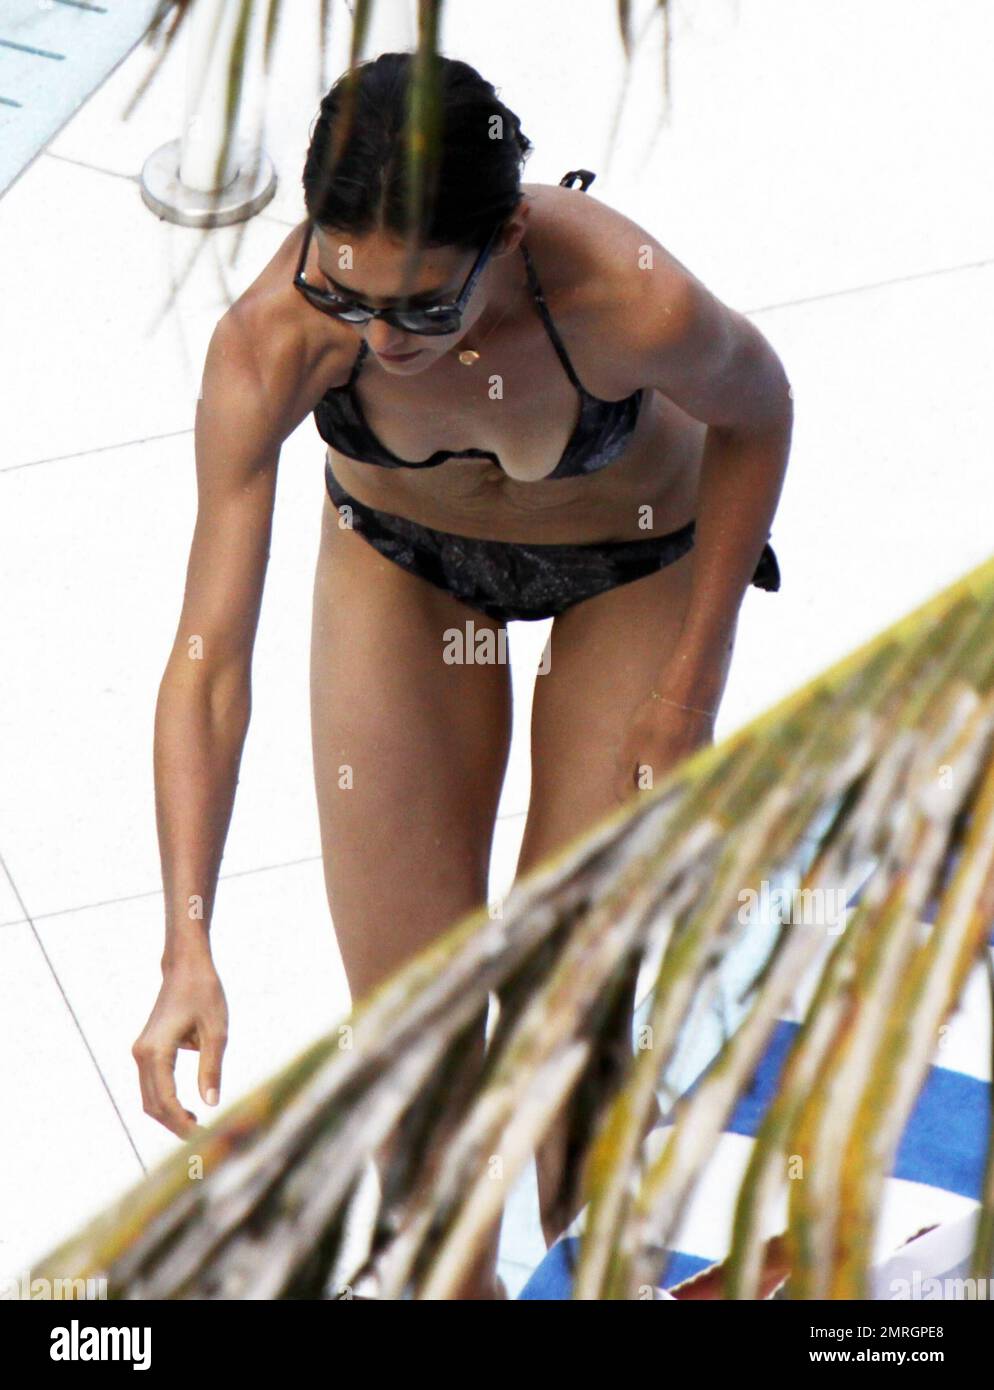 Katie Holmes shows off her slender figure in a black bikini as she relaxes  poolside in Miami, FL. 7/17/11 Stock Photo - Alamy